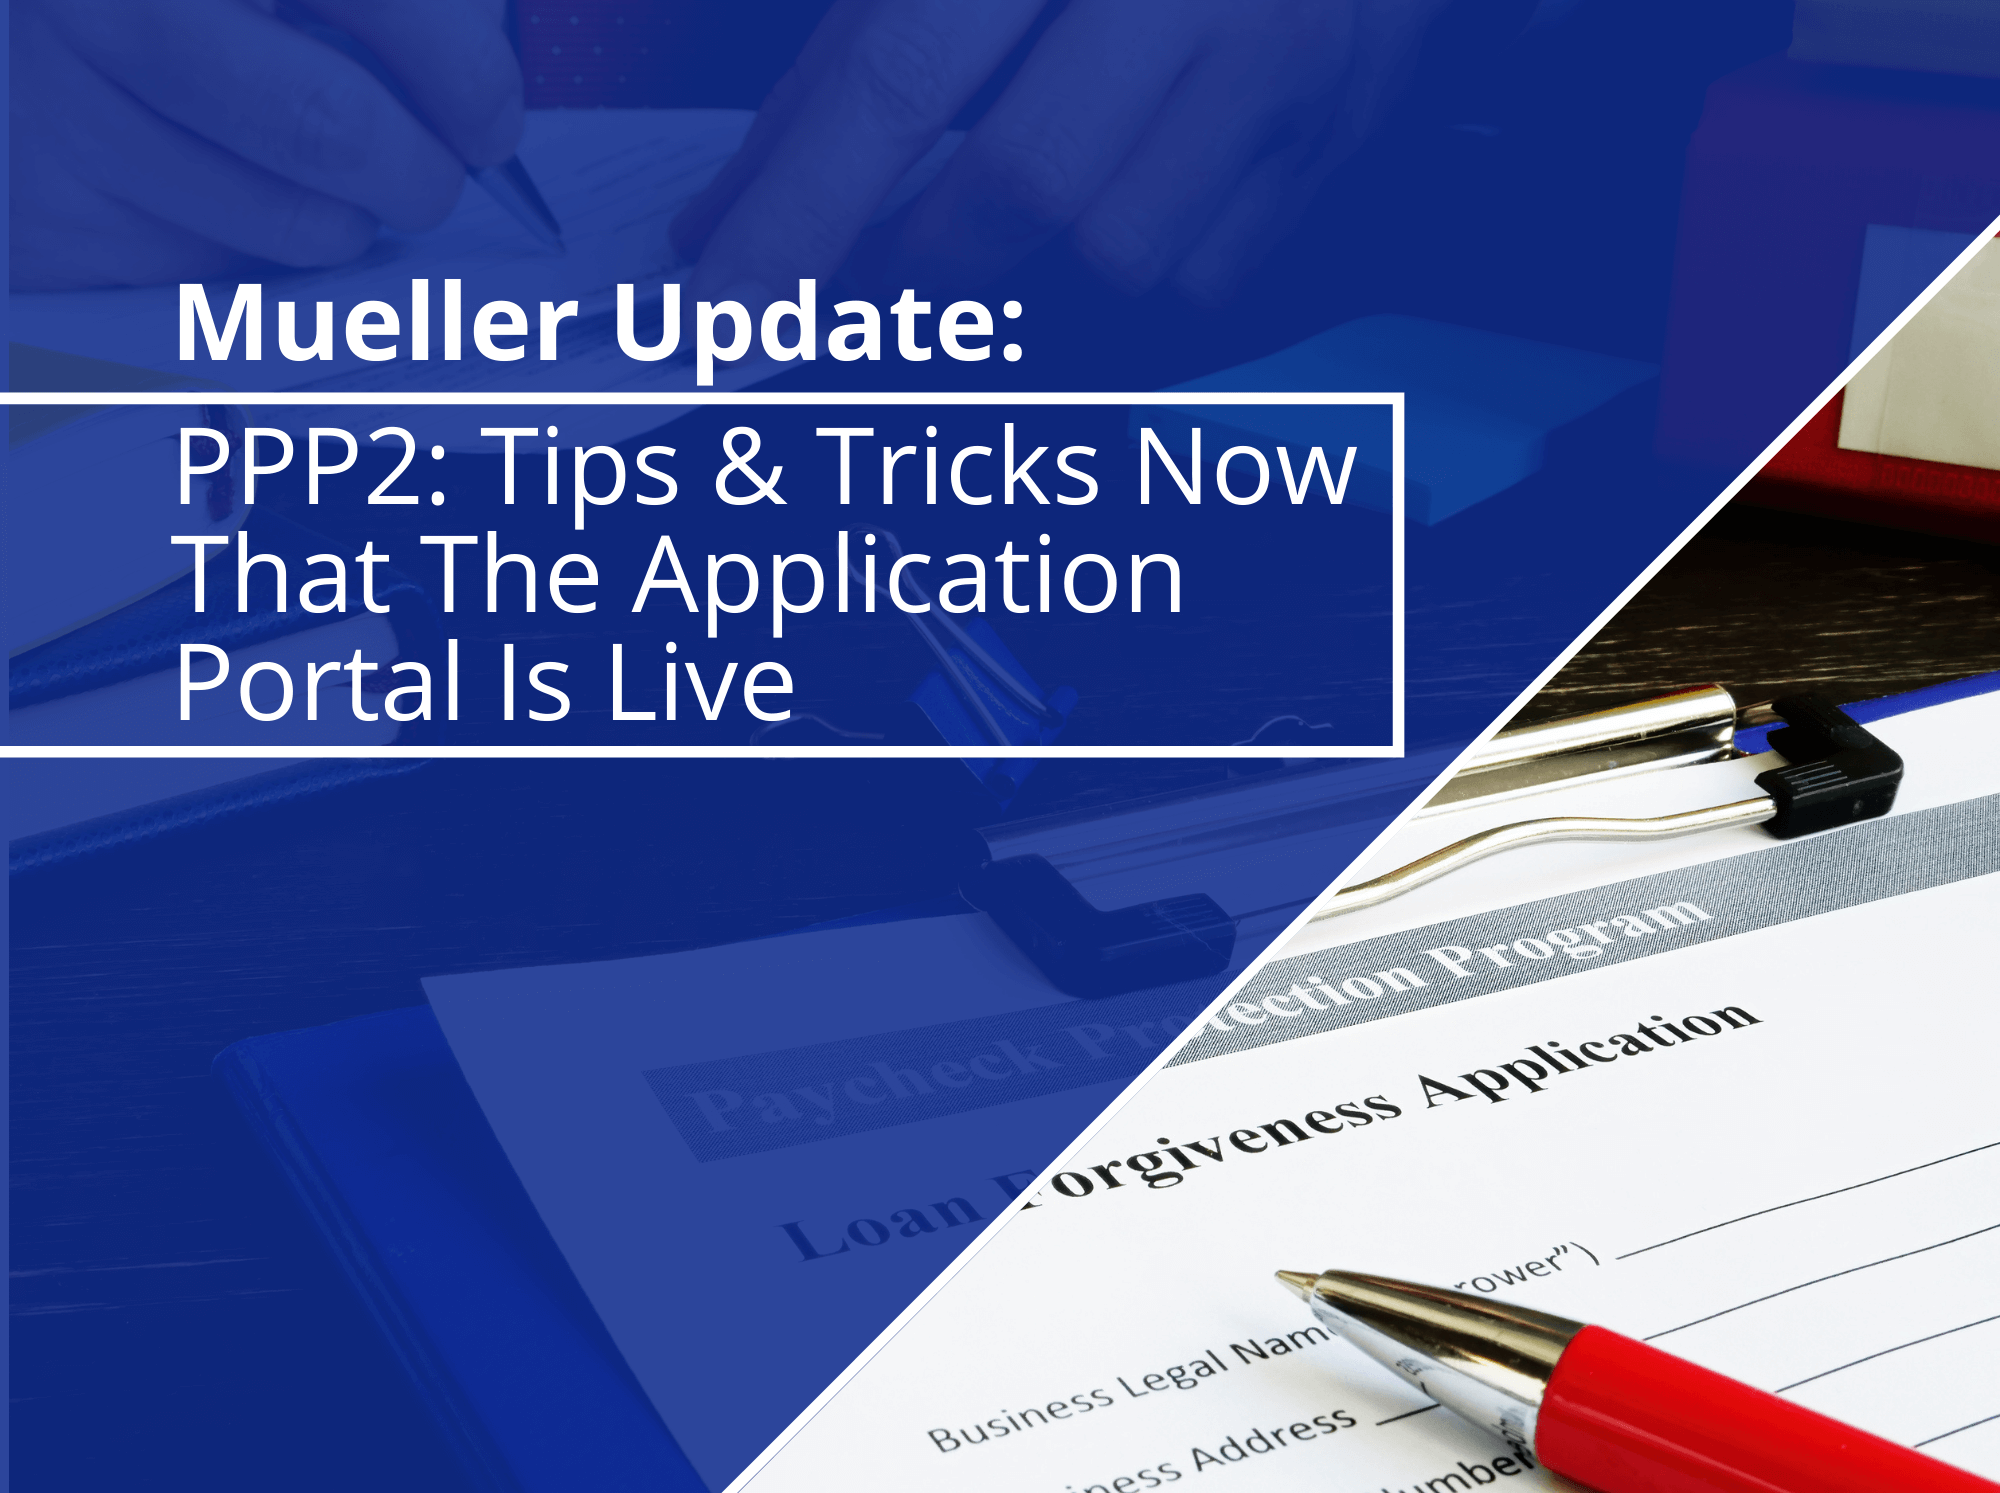 PPP2: Tips and Tricks Now That The Application Portal Is Live